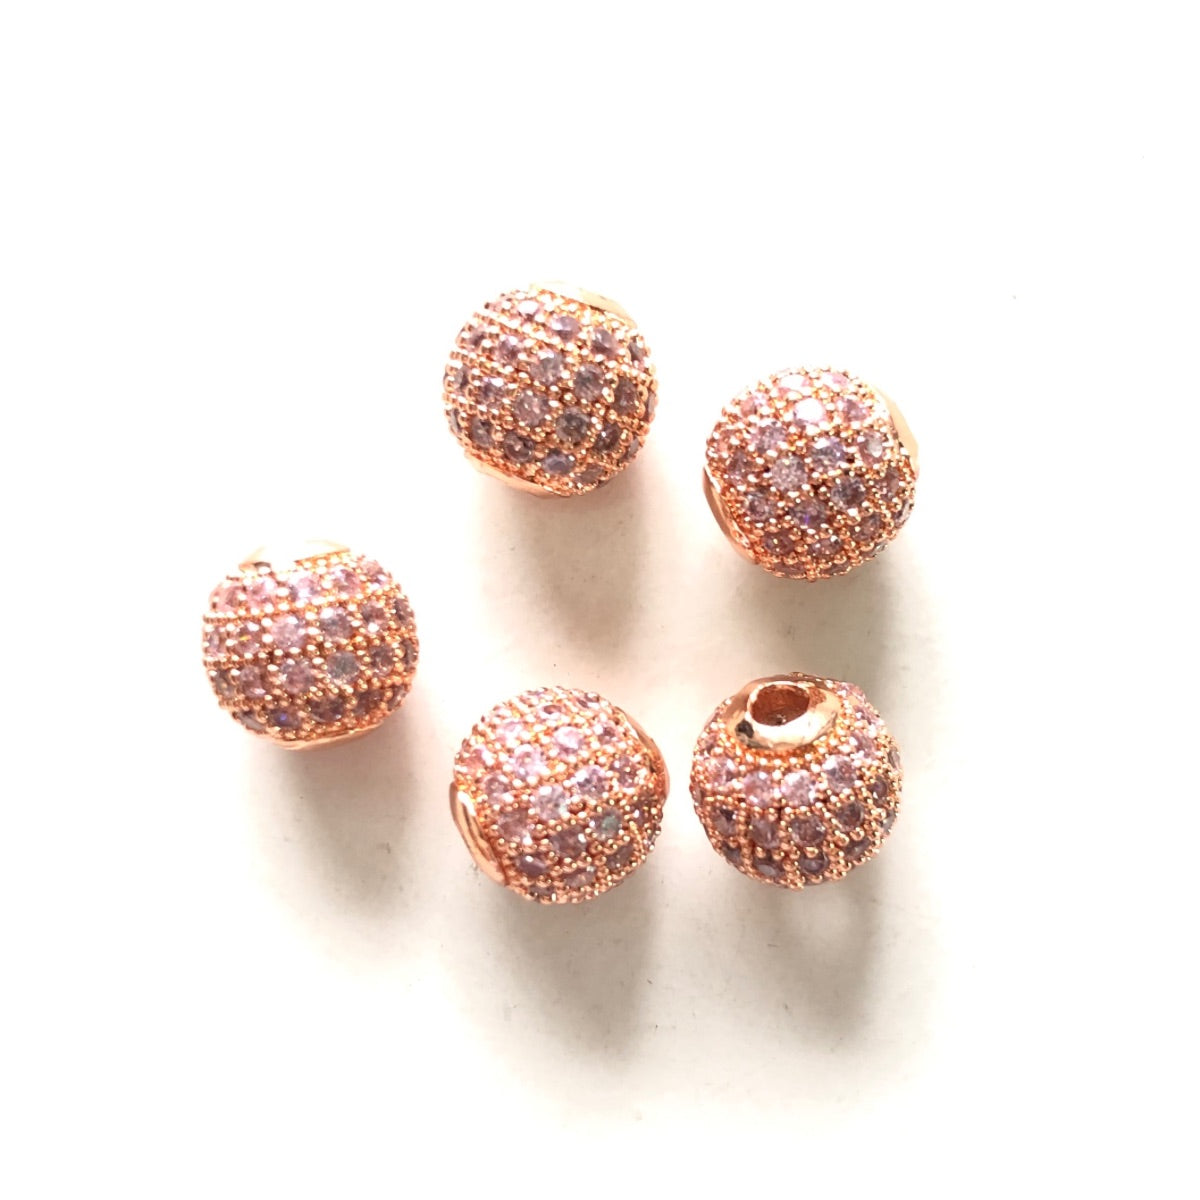 10pcs/lot 6mm, 8mm Colorful CZ Paved Ball Spacers Rose Gold Pink CZ Paved Spacers 6mm Beads 8mm Beads Ball Beads Colorful Zirconia New Spacers Arrivals Charms Beads Beyond